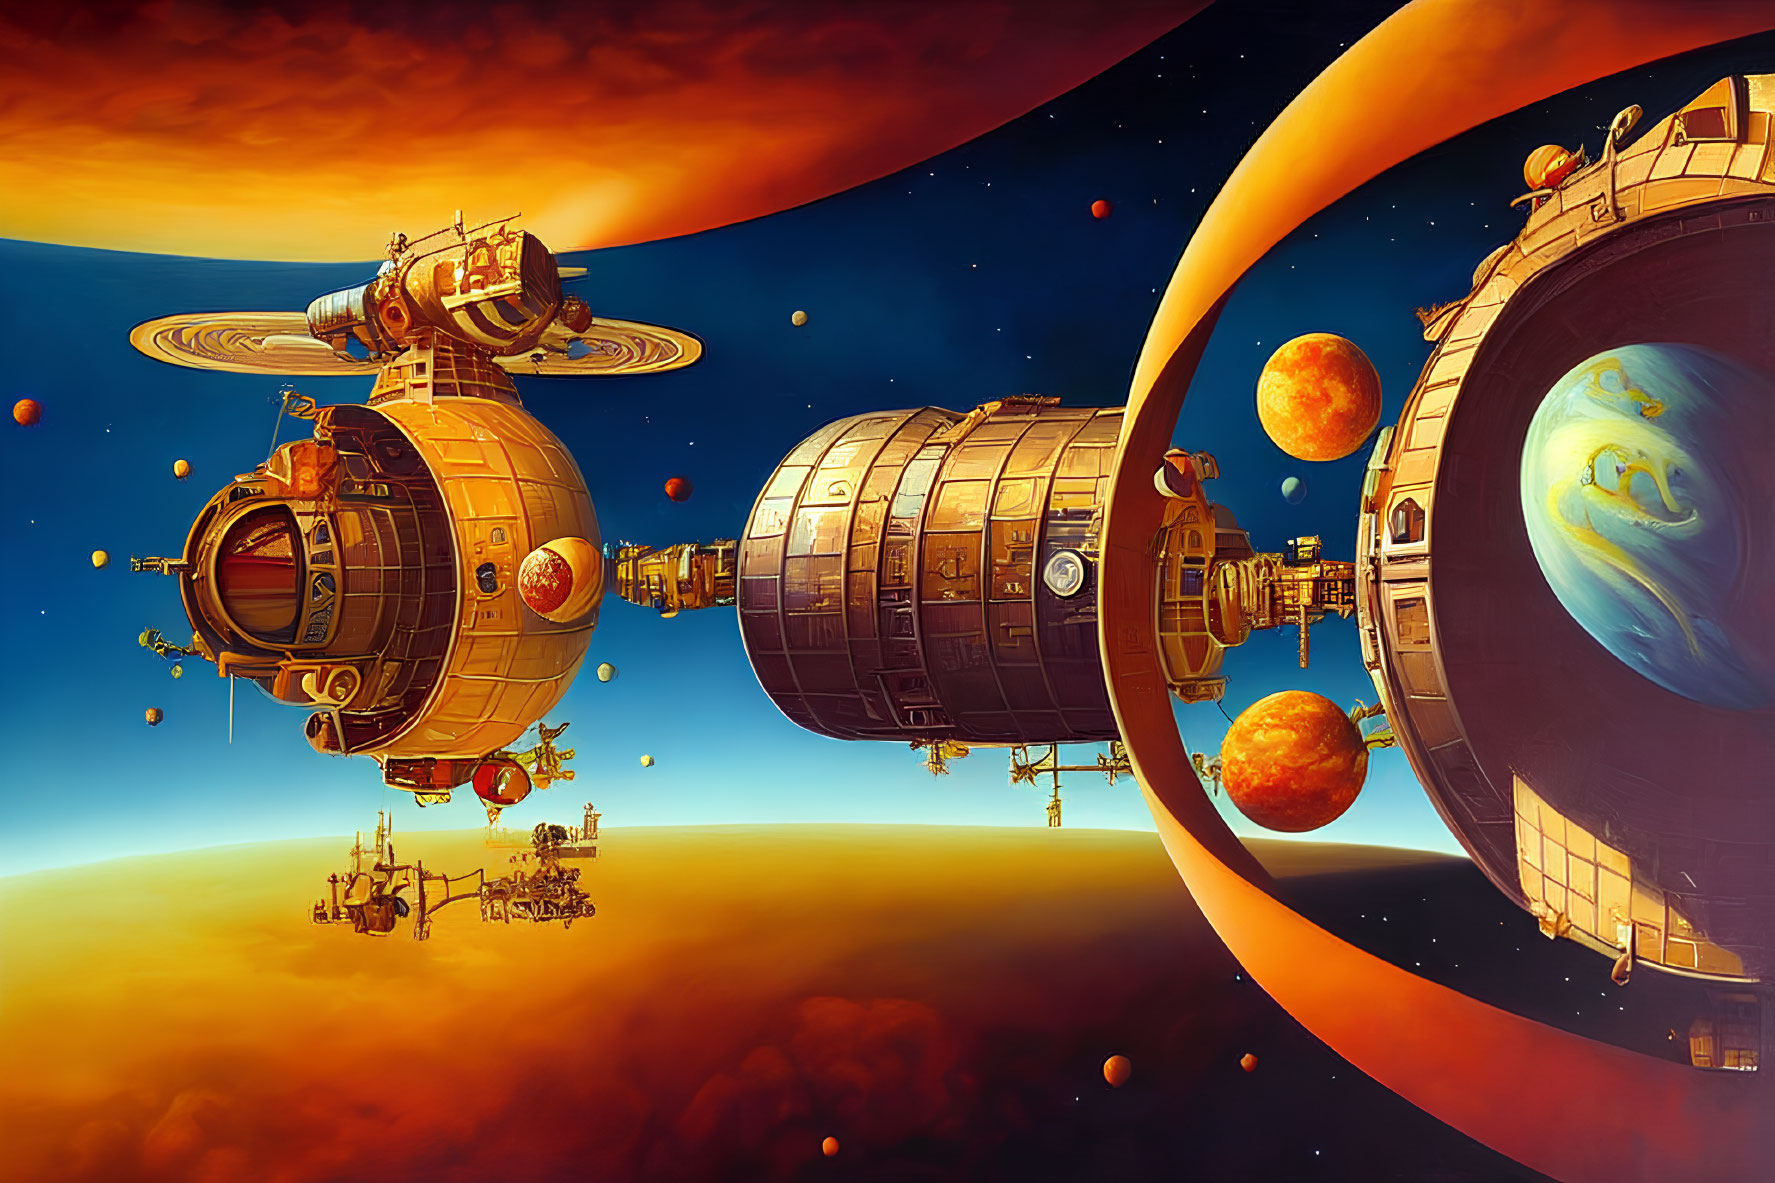 Futuristic space stations orbiting ringed planet with moons in orange cosmic setting